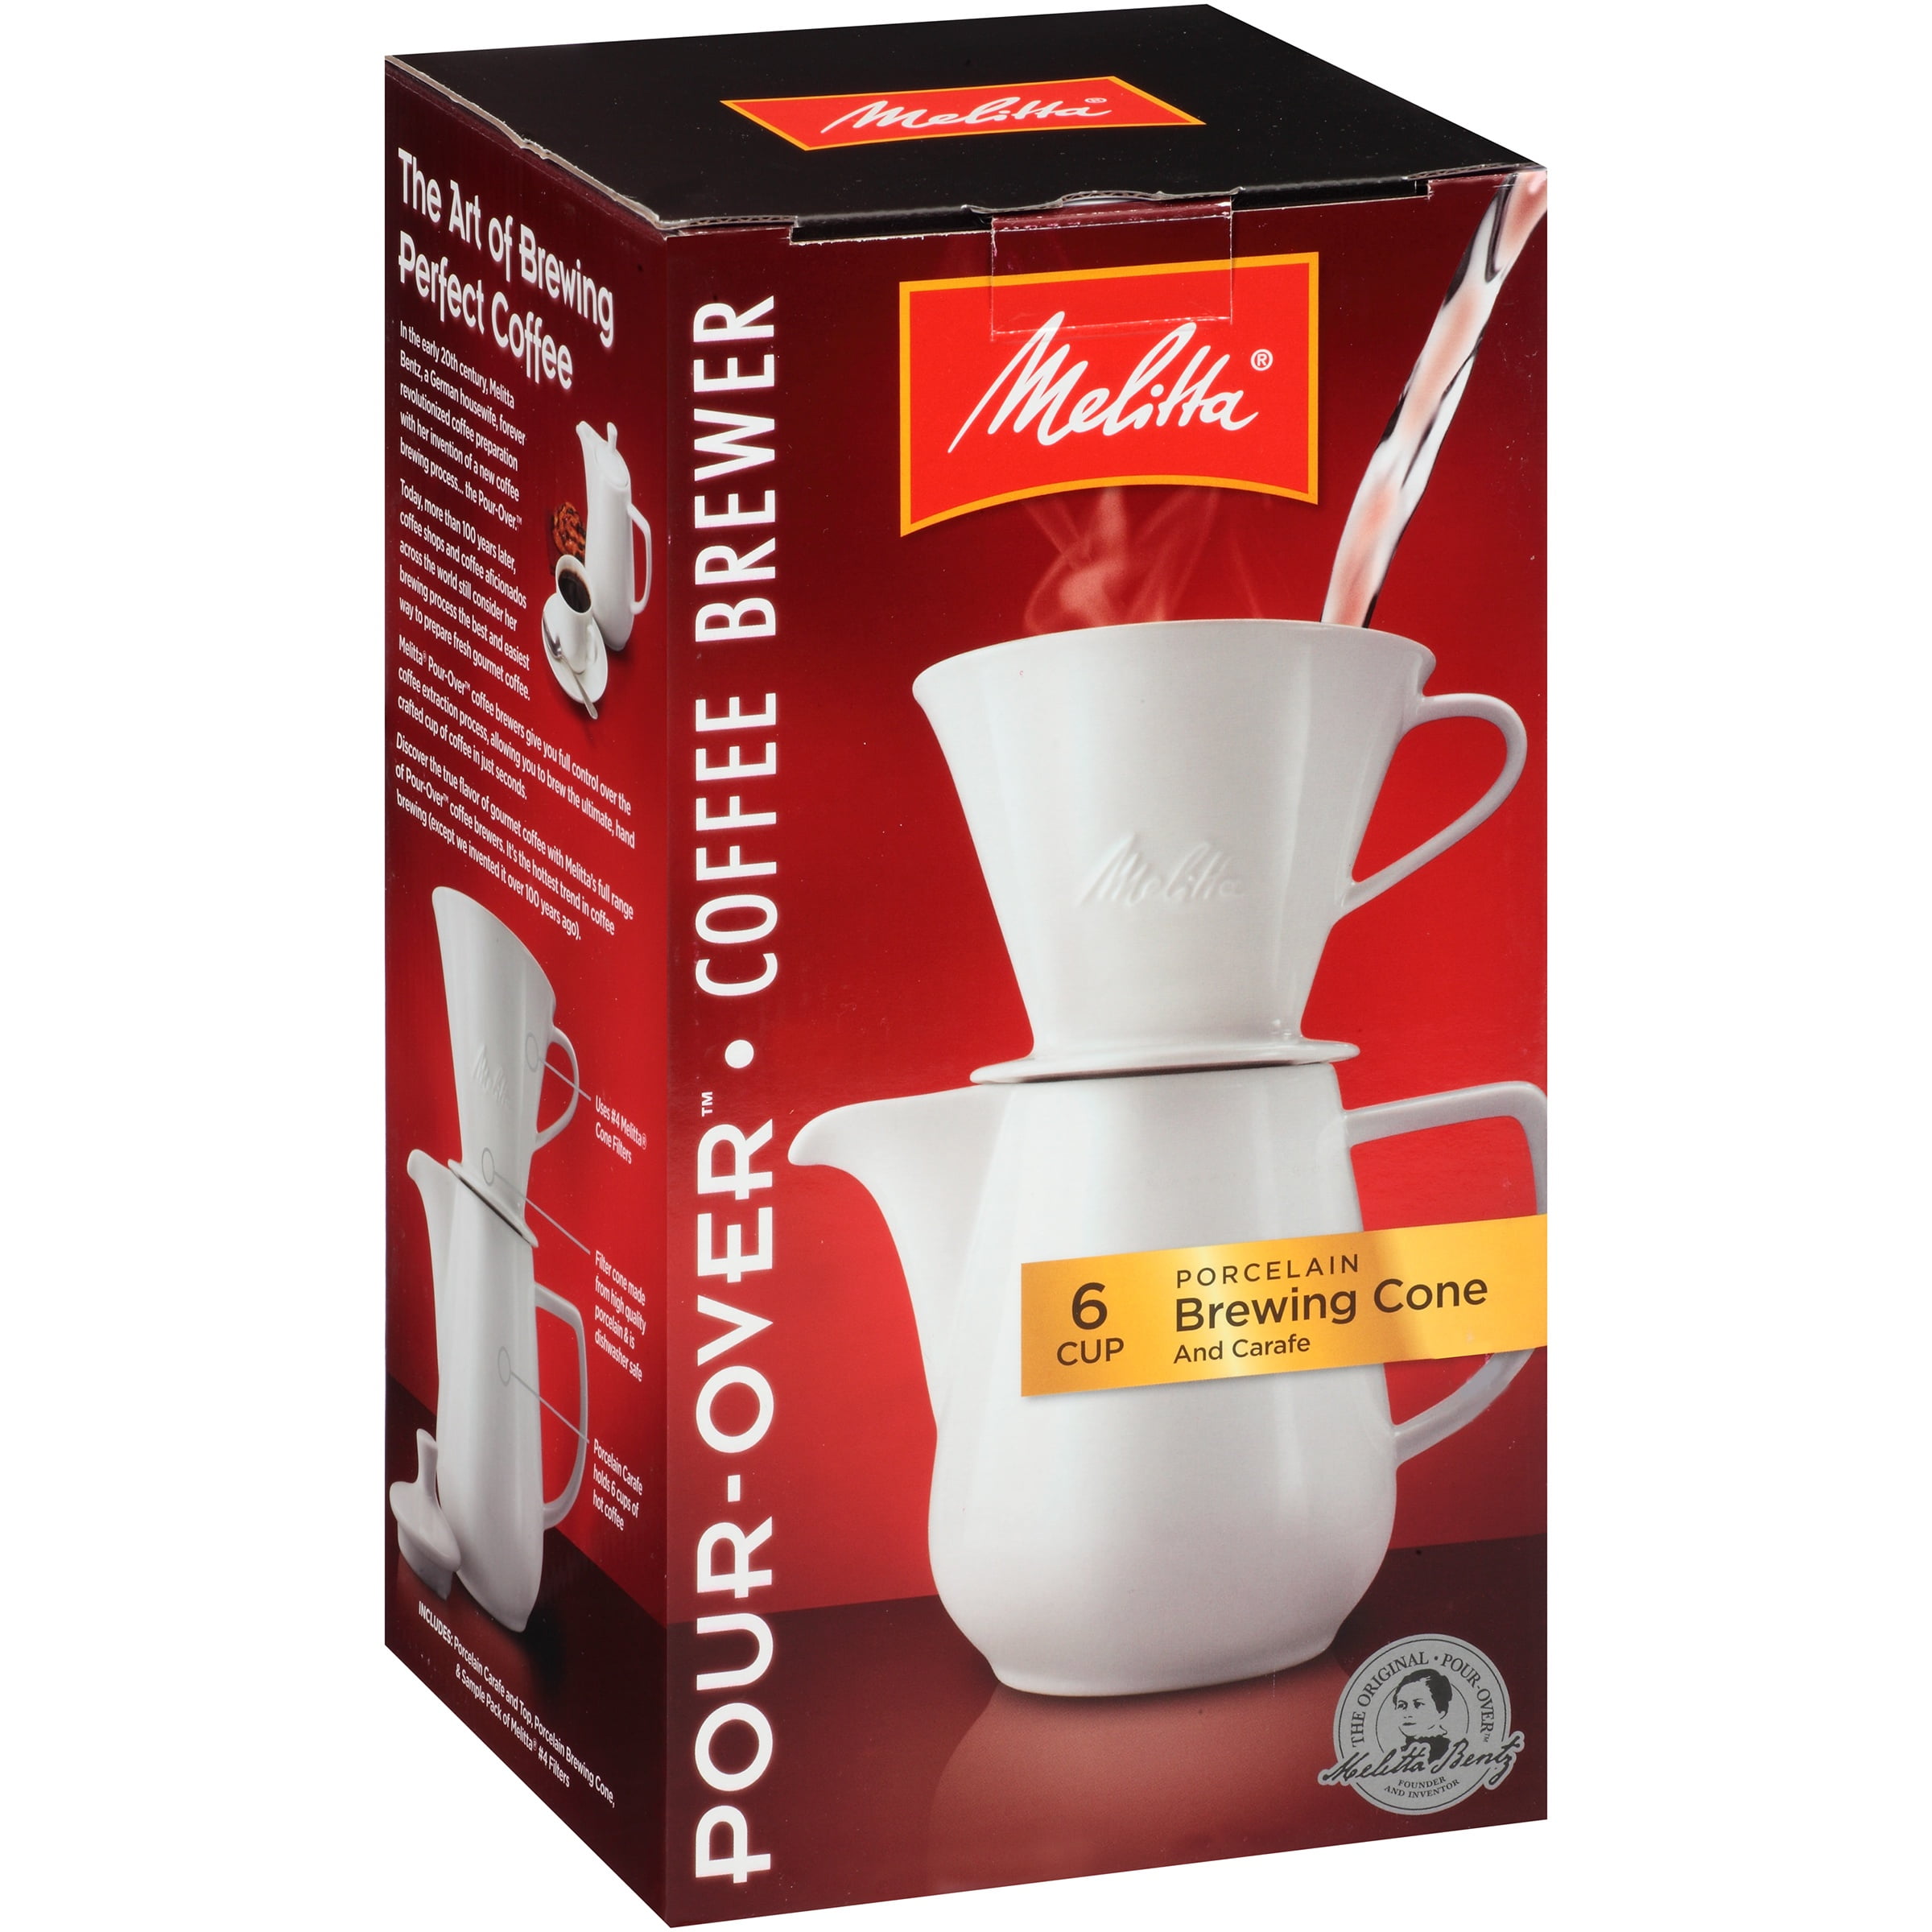 Buy Melitta Perfect Clean cleaning tabs Set accessory